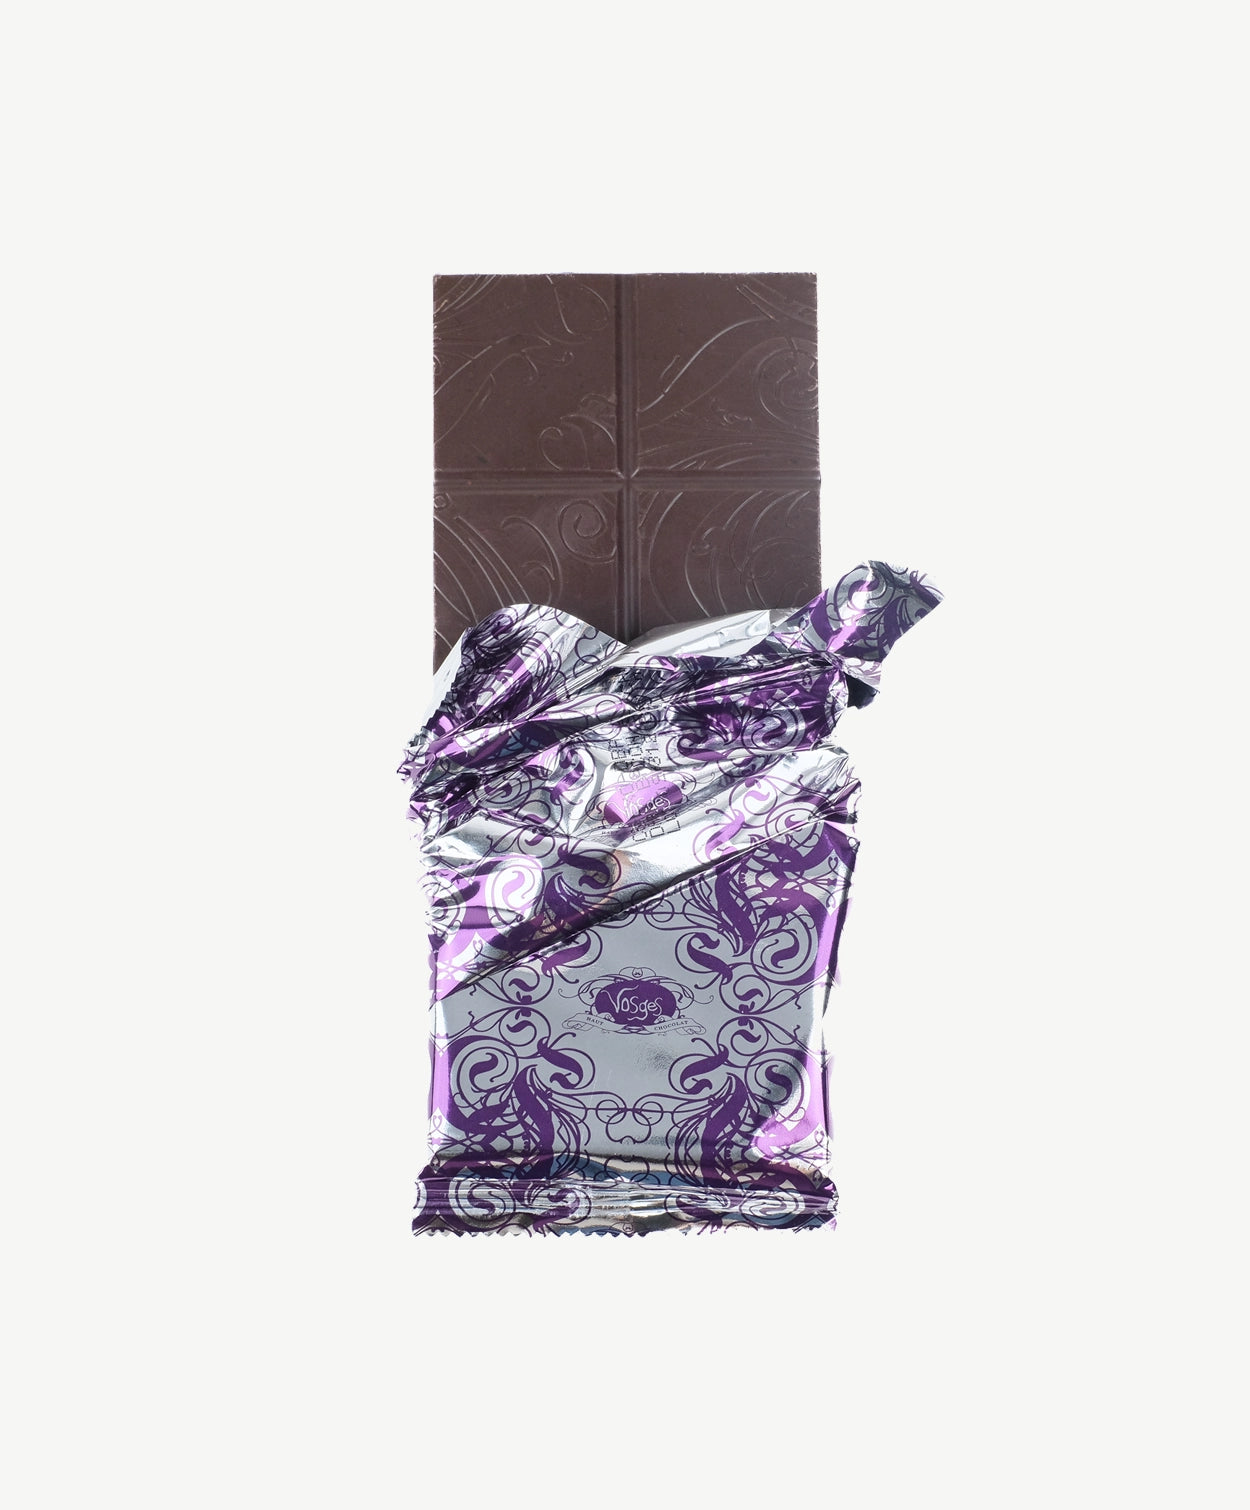 An opened Vosges Banana Coconut Chocolate bar in a silver wrapper stands upright on a white background.